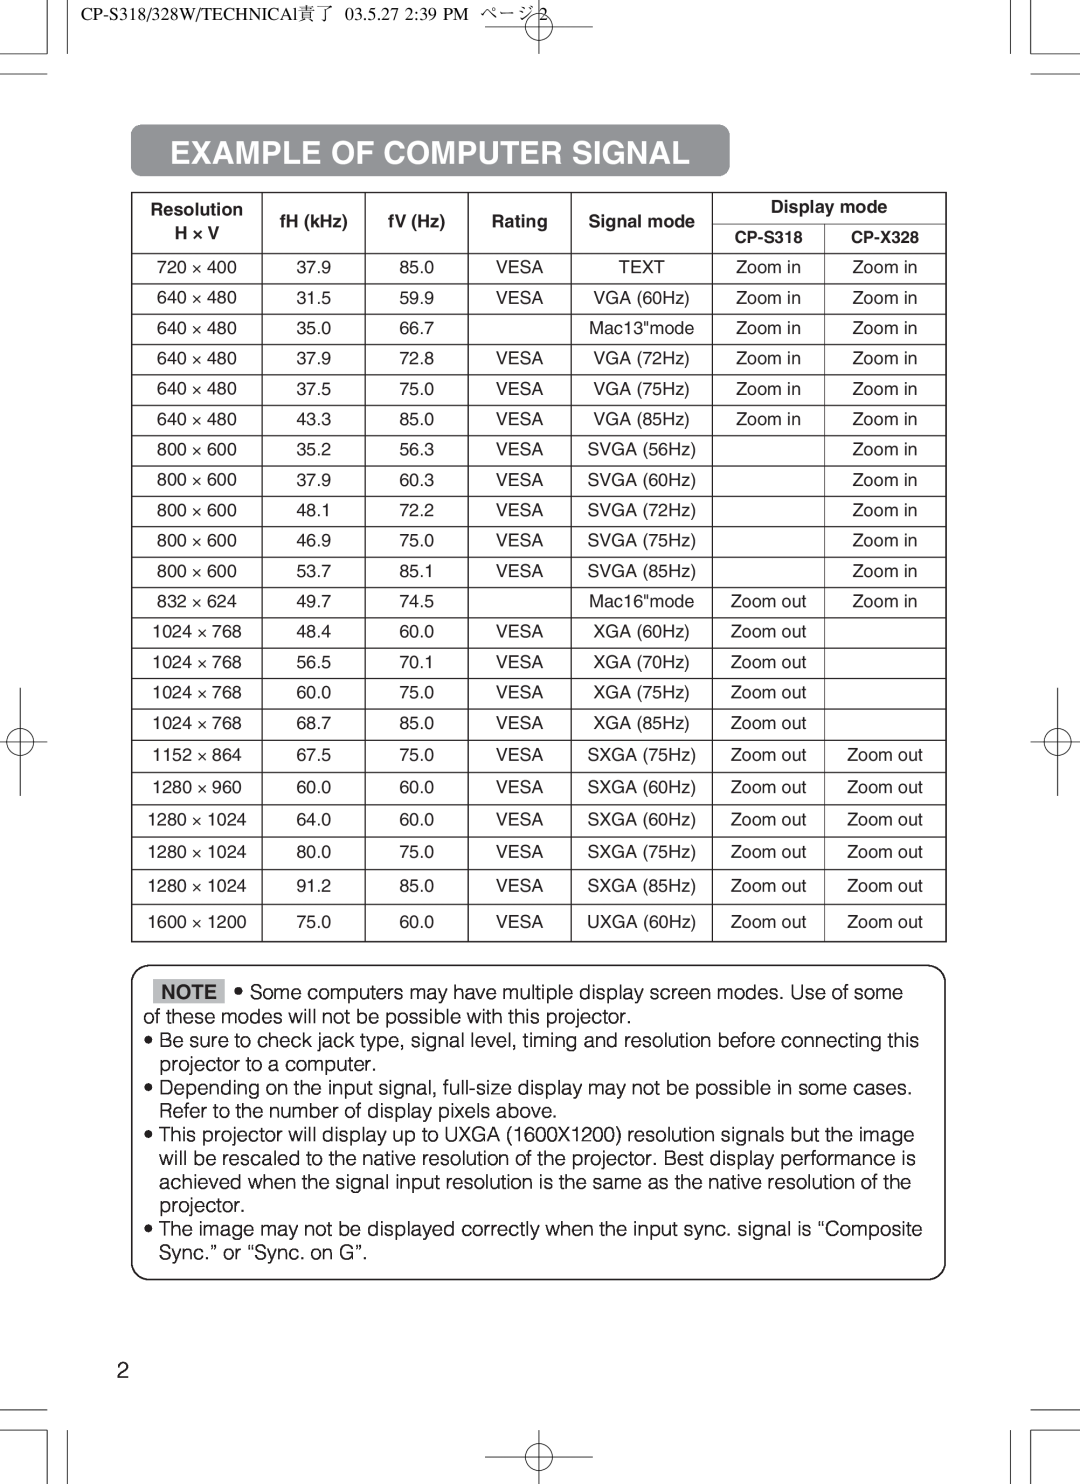 Hitachi cp-s318 user manual Example Of Computer Signal, Resolution, fH kHz, fV Hz, Rating, Signal mode, Display mode 